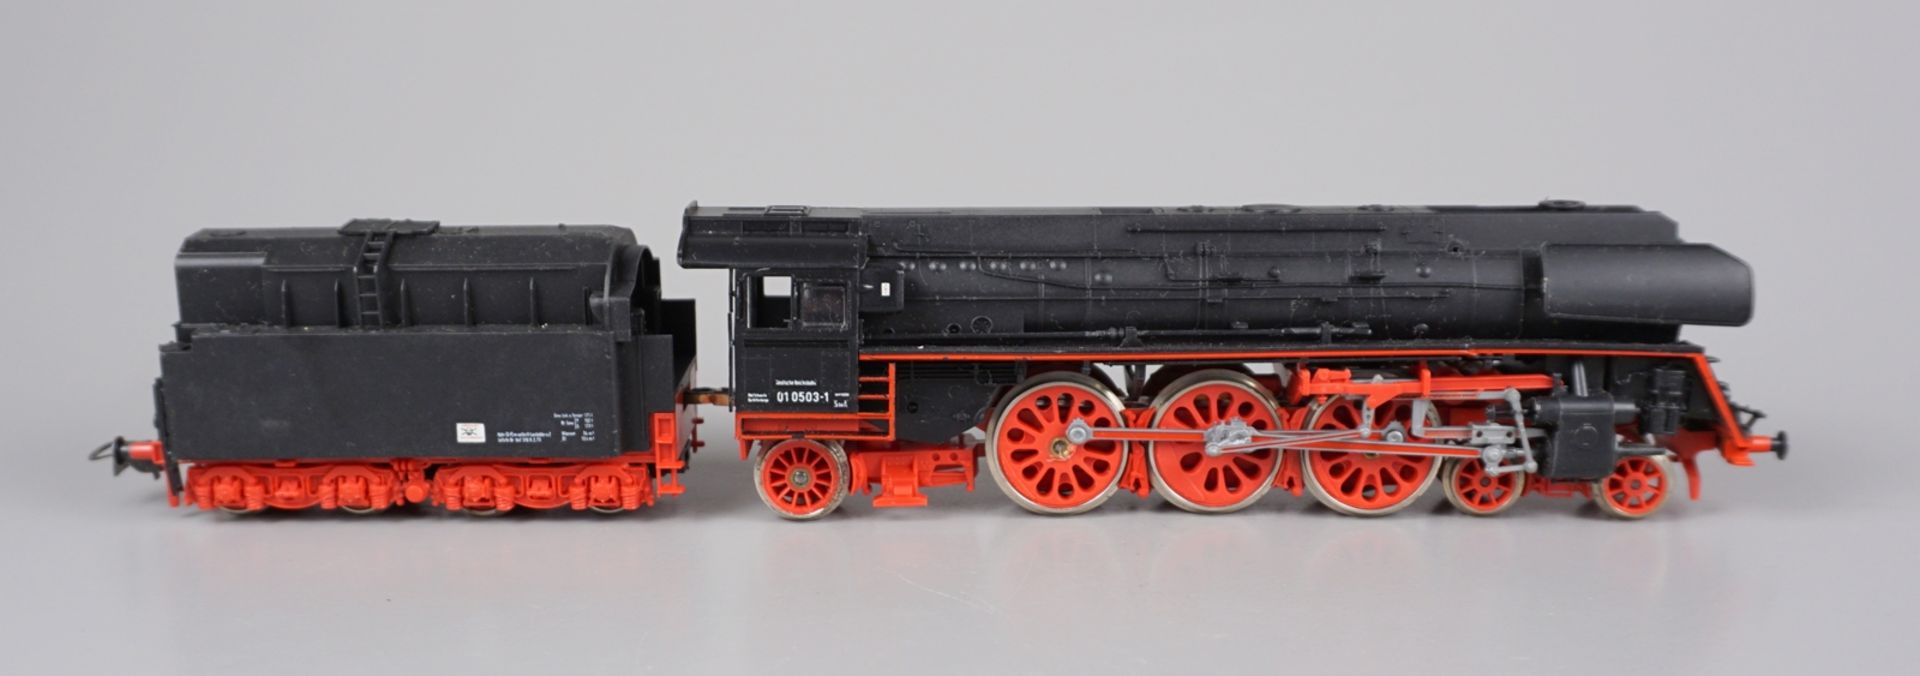 PIKO steam locomotive BR 01 0503-1 of the DR with oil tender, H0 - Image 2 of 4